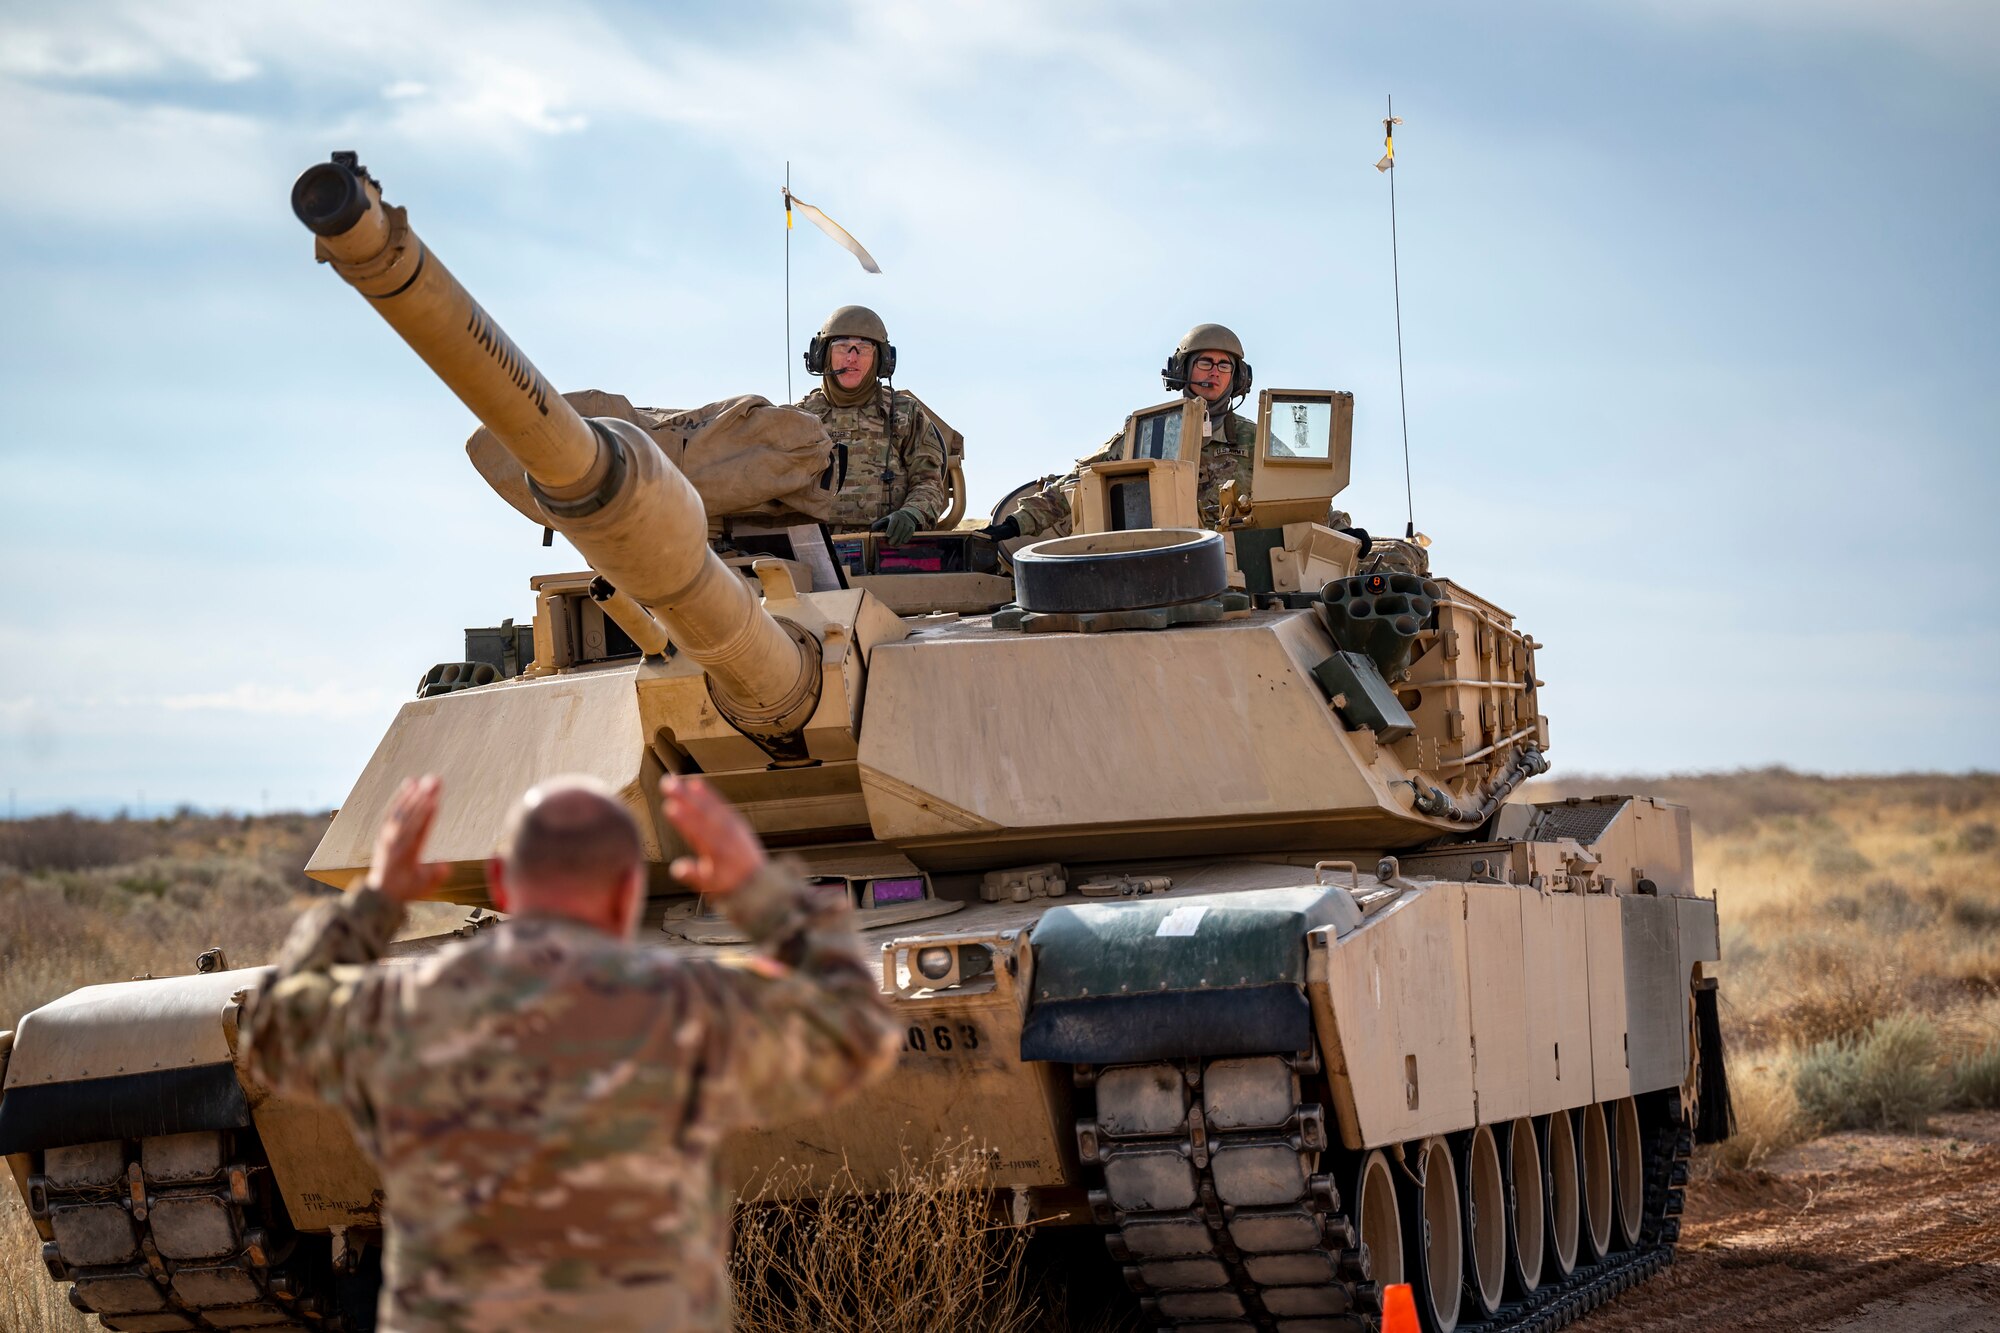 U.S. Army members assigned to the 1st Armored Division move an M1A2 Abrams tank into position to simulate receiving fuel from a C-130J Super Hercules at Fort Bliss, Texas, Dec. 9, 2022. This exercise allowed U.S. forces to practice and showcase their interoperability and joint effectiveness for future contingency operations. (U.S. Air Force photo by Senior Airman Leon Redfern)